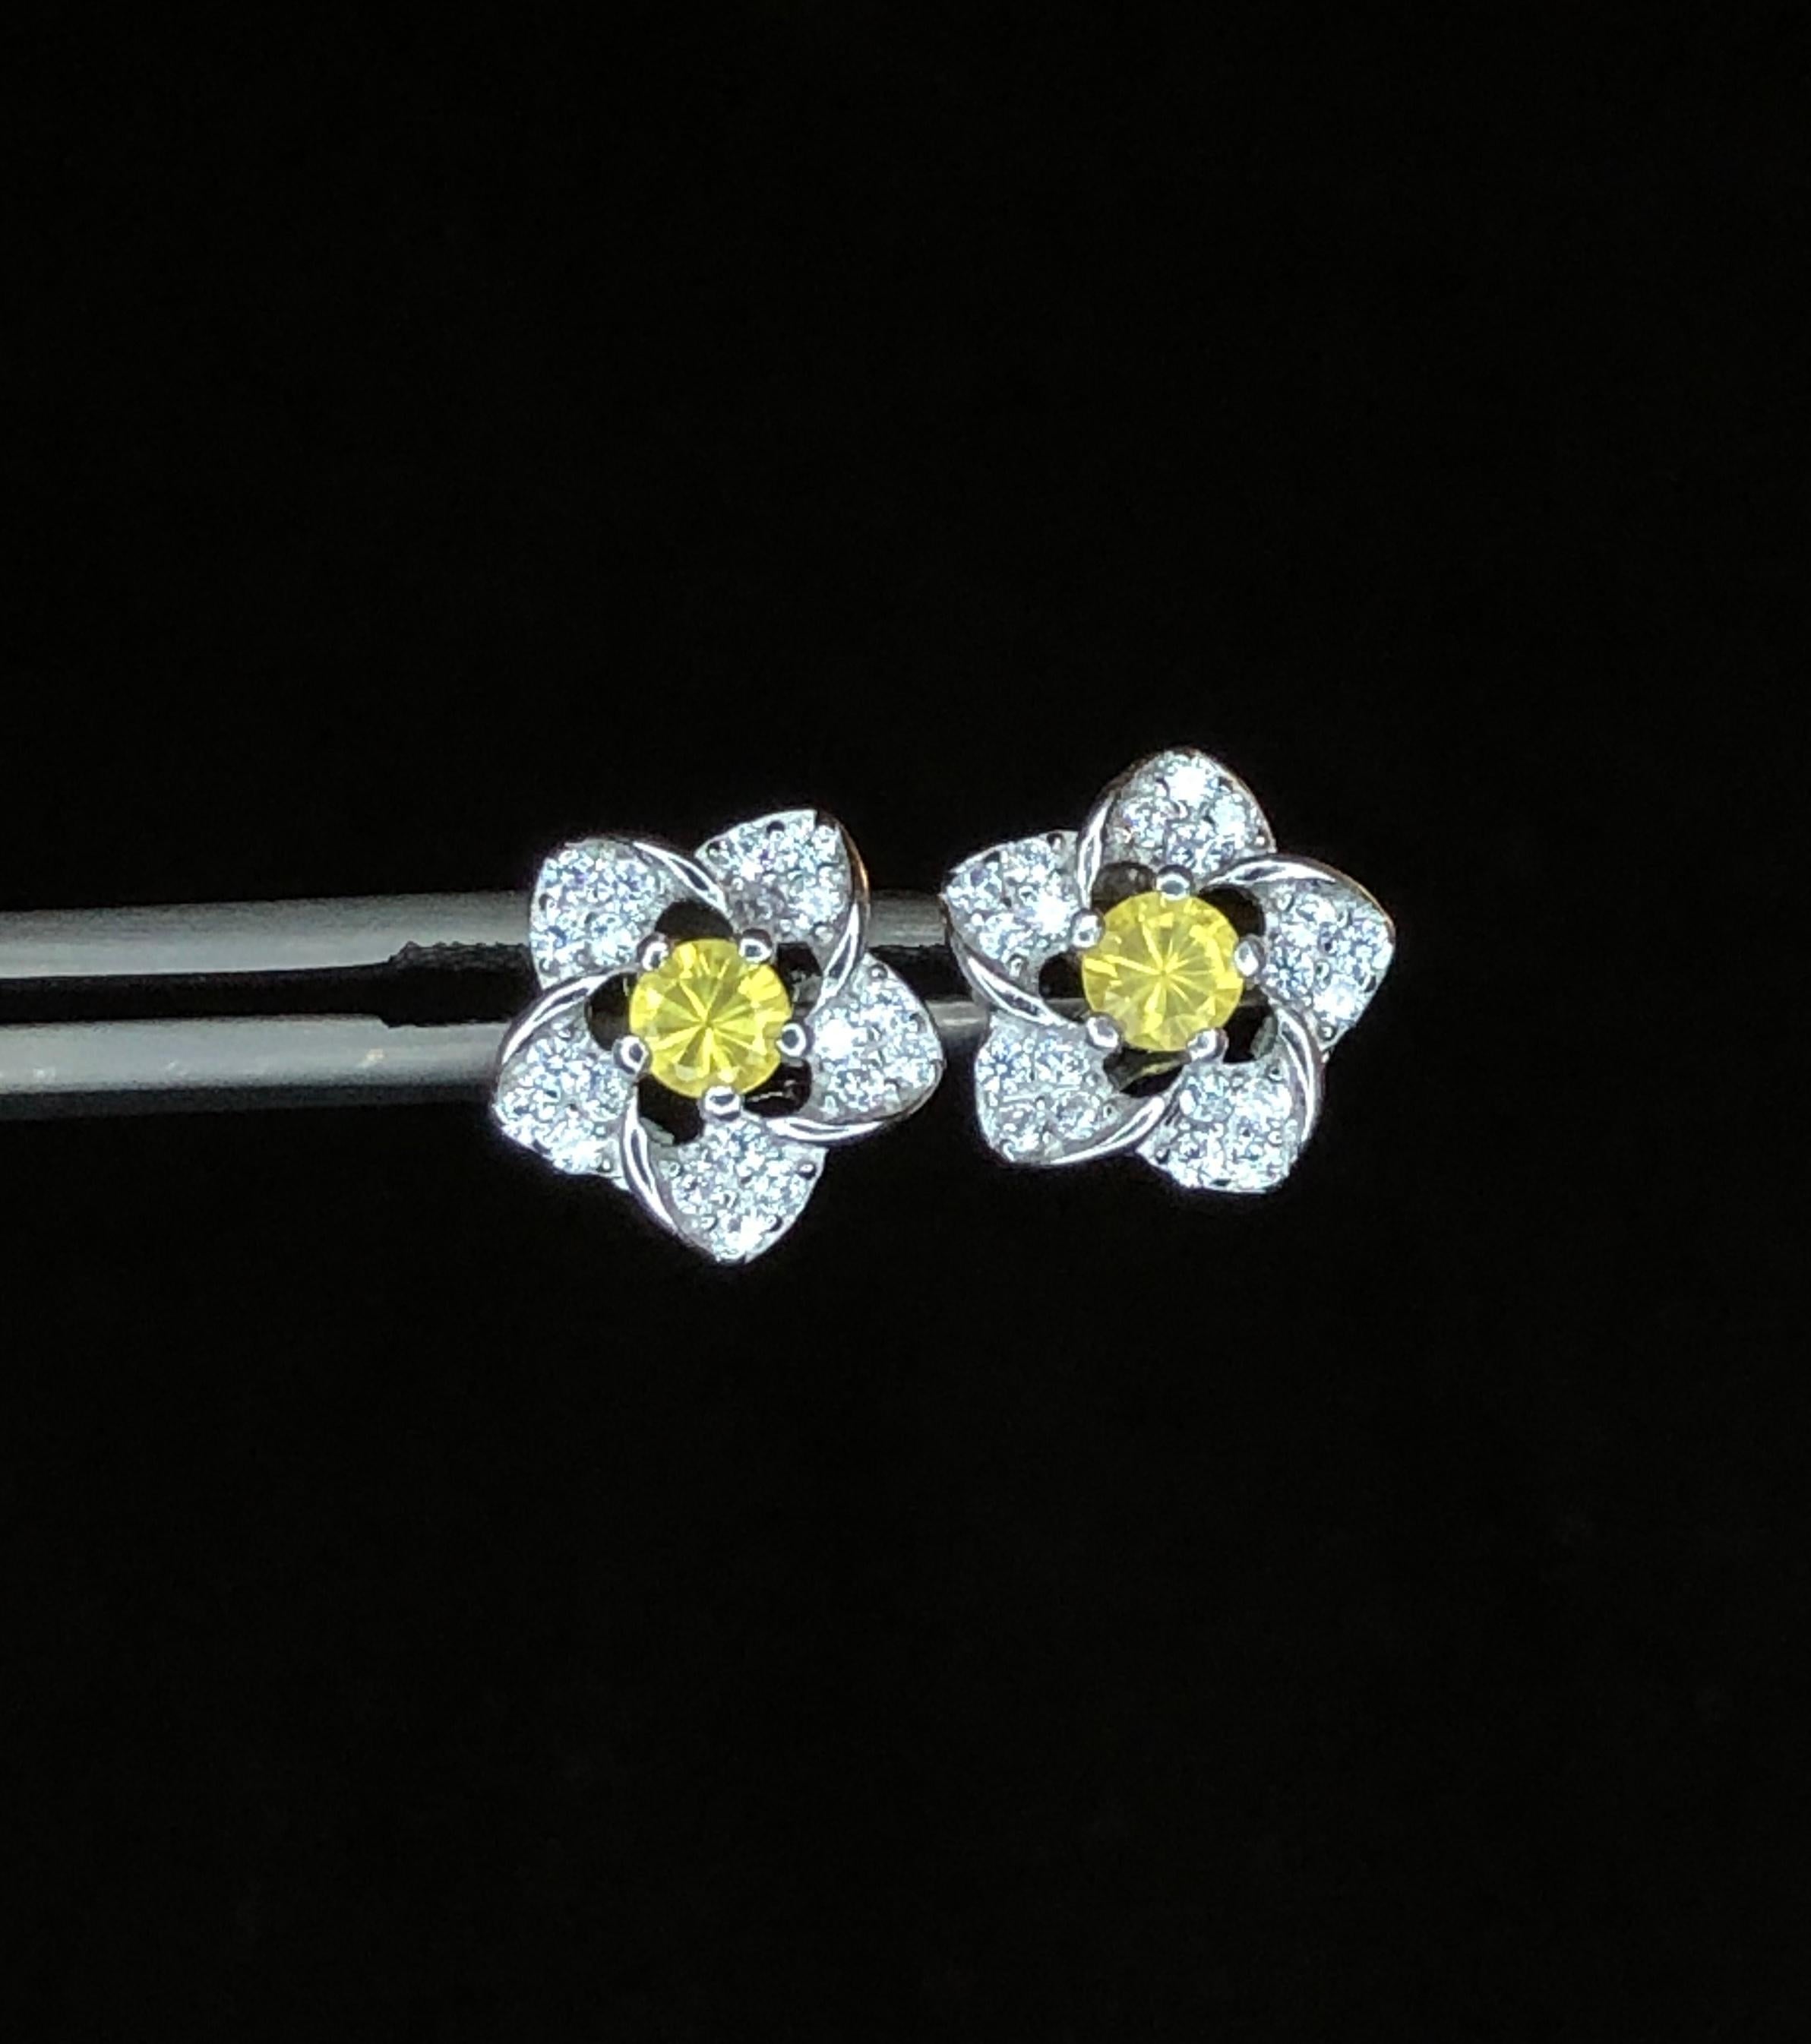 Our exquisite Floral 925 Silver Earrings, featuring radiant yellow sapphire stones sourced from Ceylon, Sri Lanka, accented with sparkling cubic zirconia. Crafted for elegance and durability, these earrings are perfect for daily wear, adding a touch